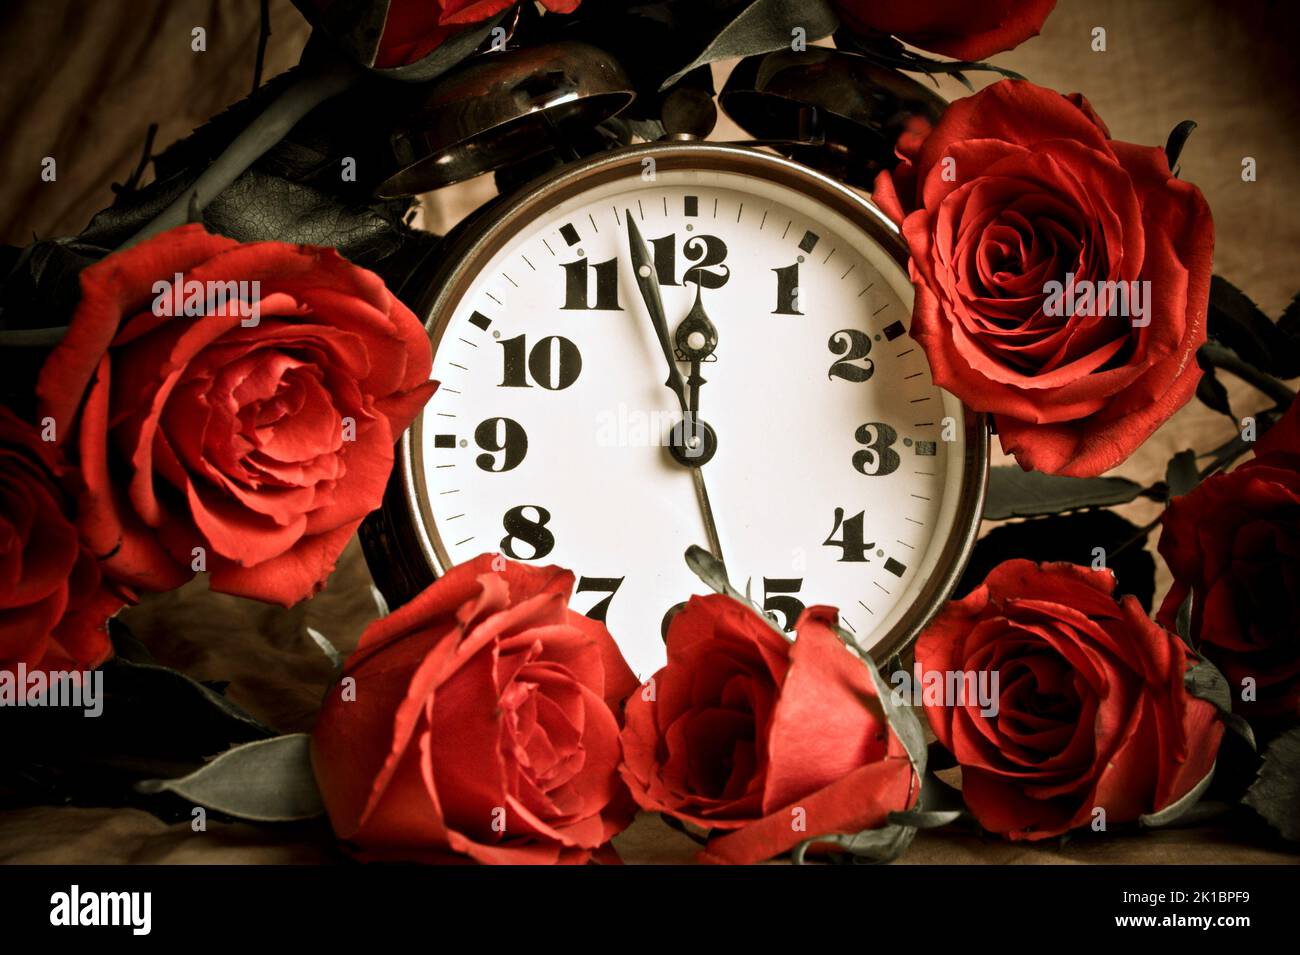 red roses and retro alarm clock in vintage style Stock Photo